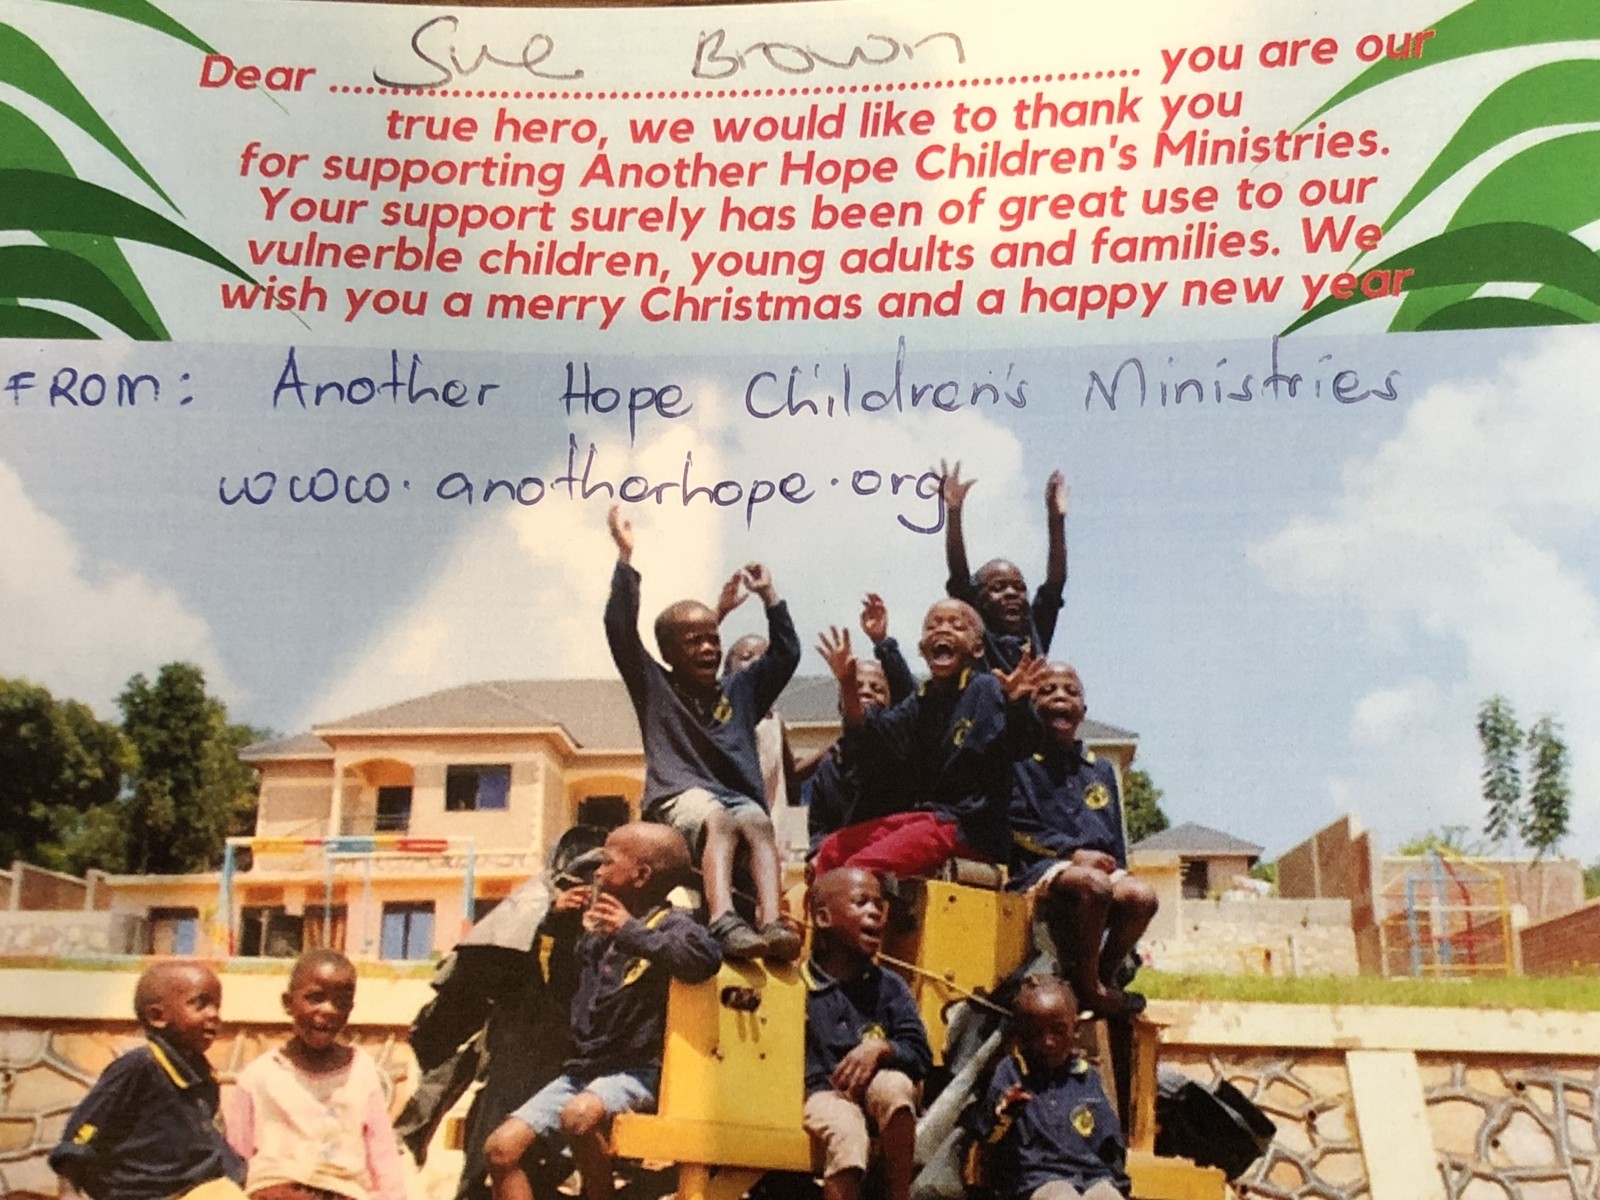 Thank You Postcard from Another Hope Children's Ministries